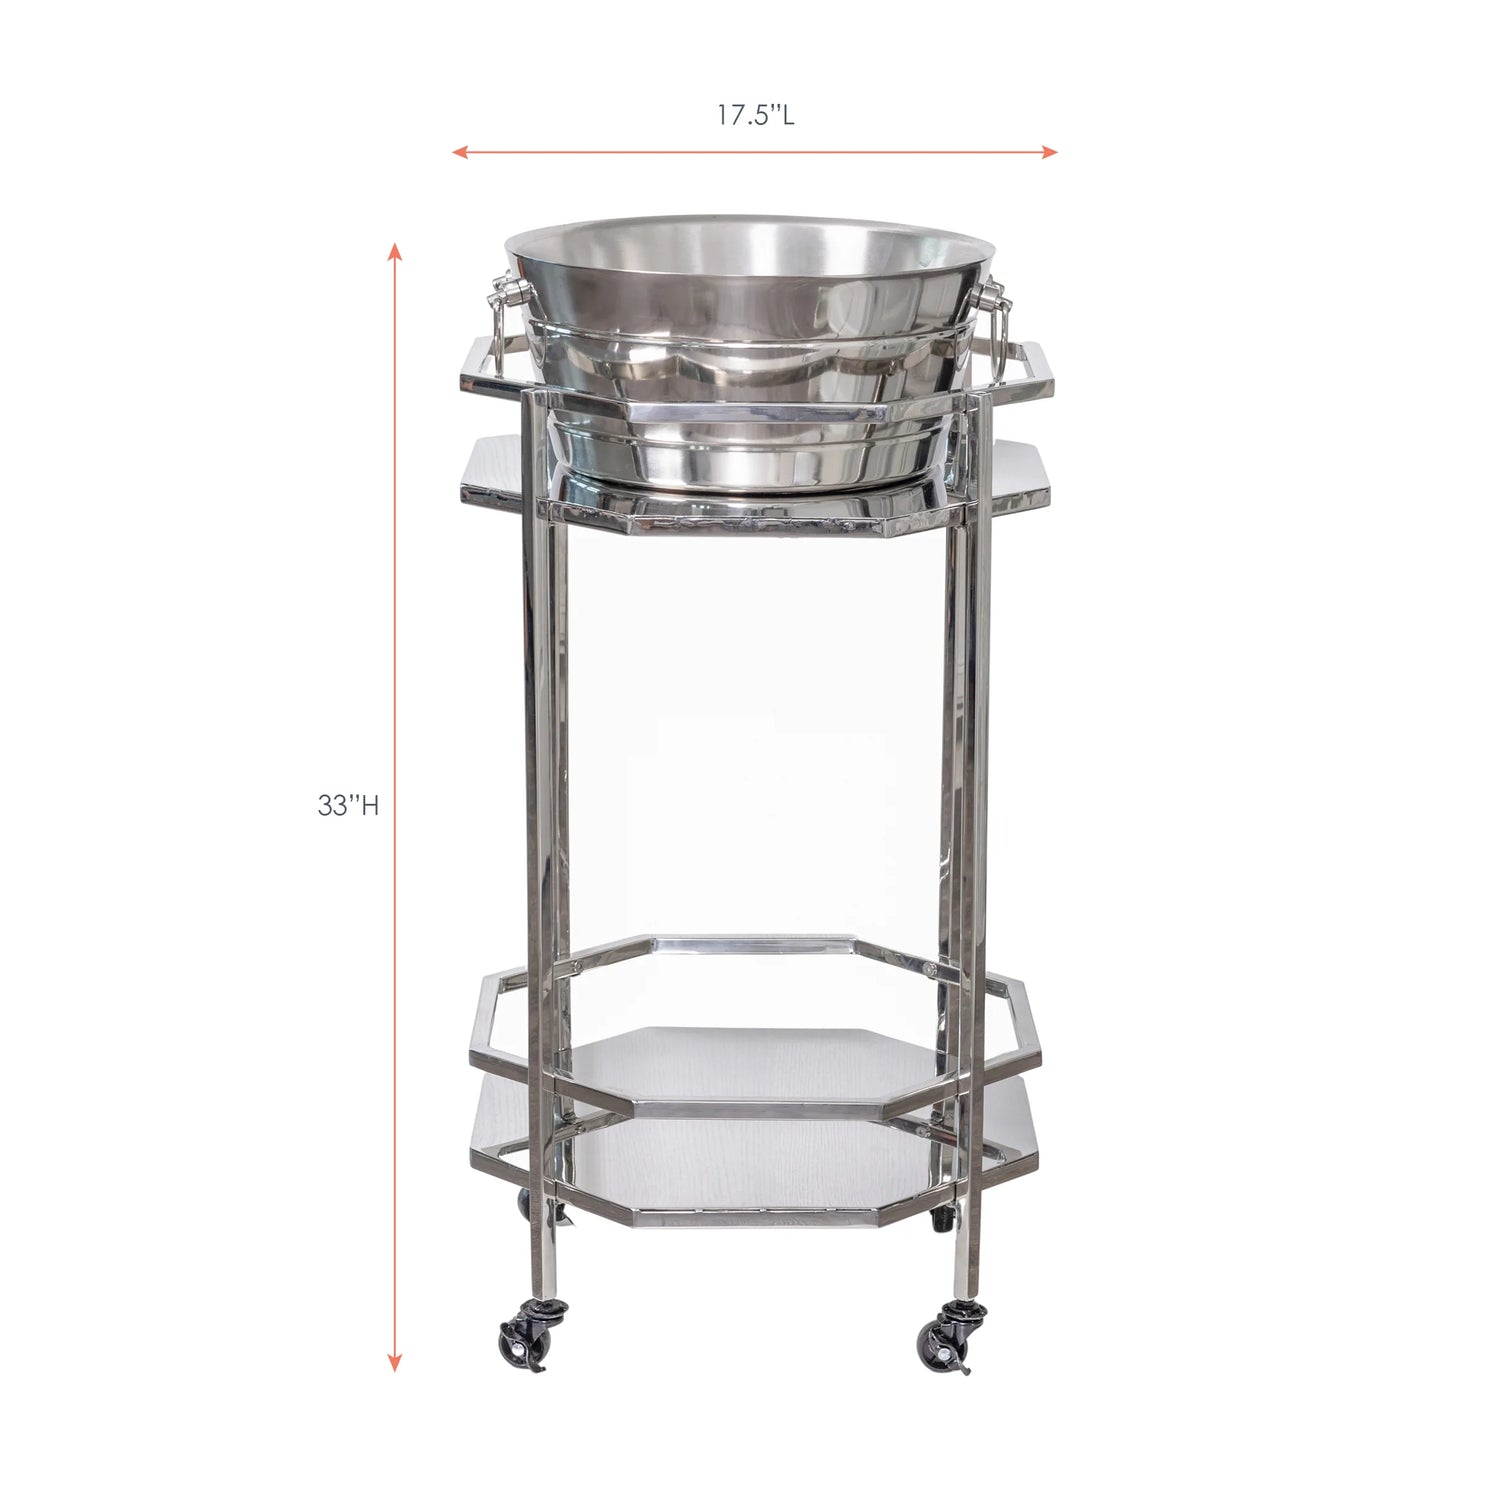 Metal rolling cooler bar cart for parties.  Includes stainless steel cart with shelves and insulated steel party tub to hold and chill wine, beer, and drinks for parties.